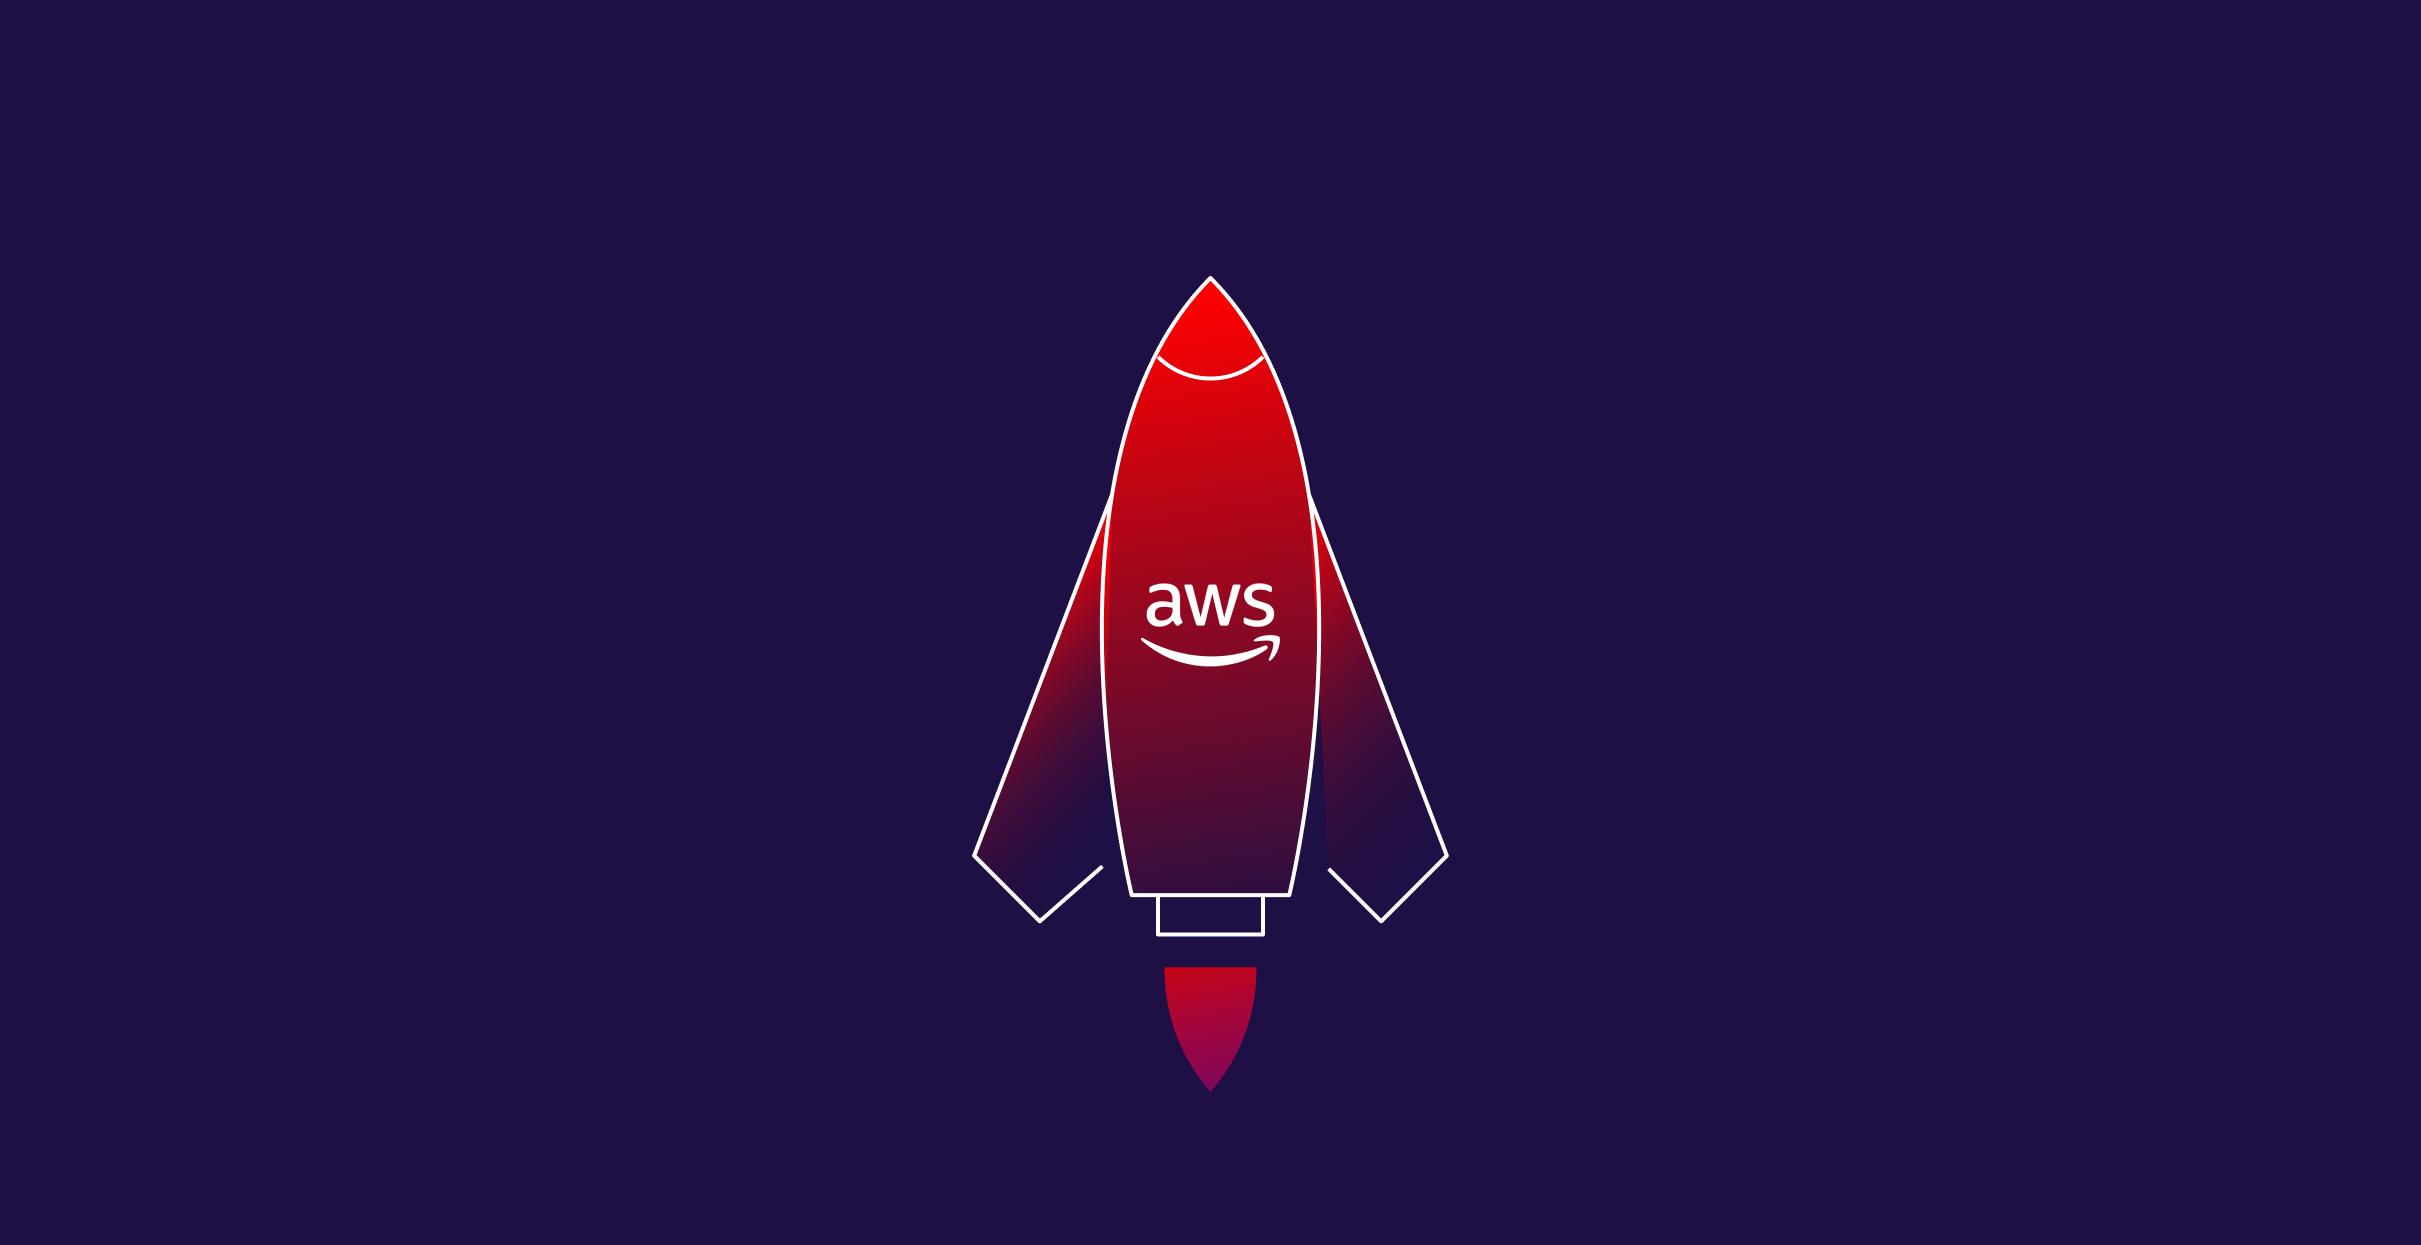 How to Get a Faster Network With AWS_Megaport blog